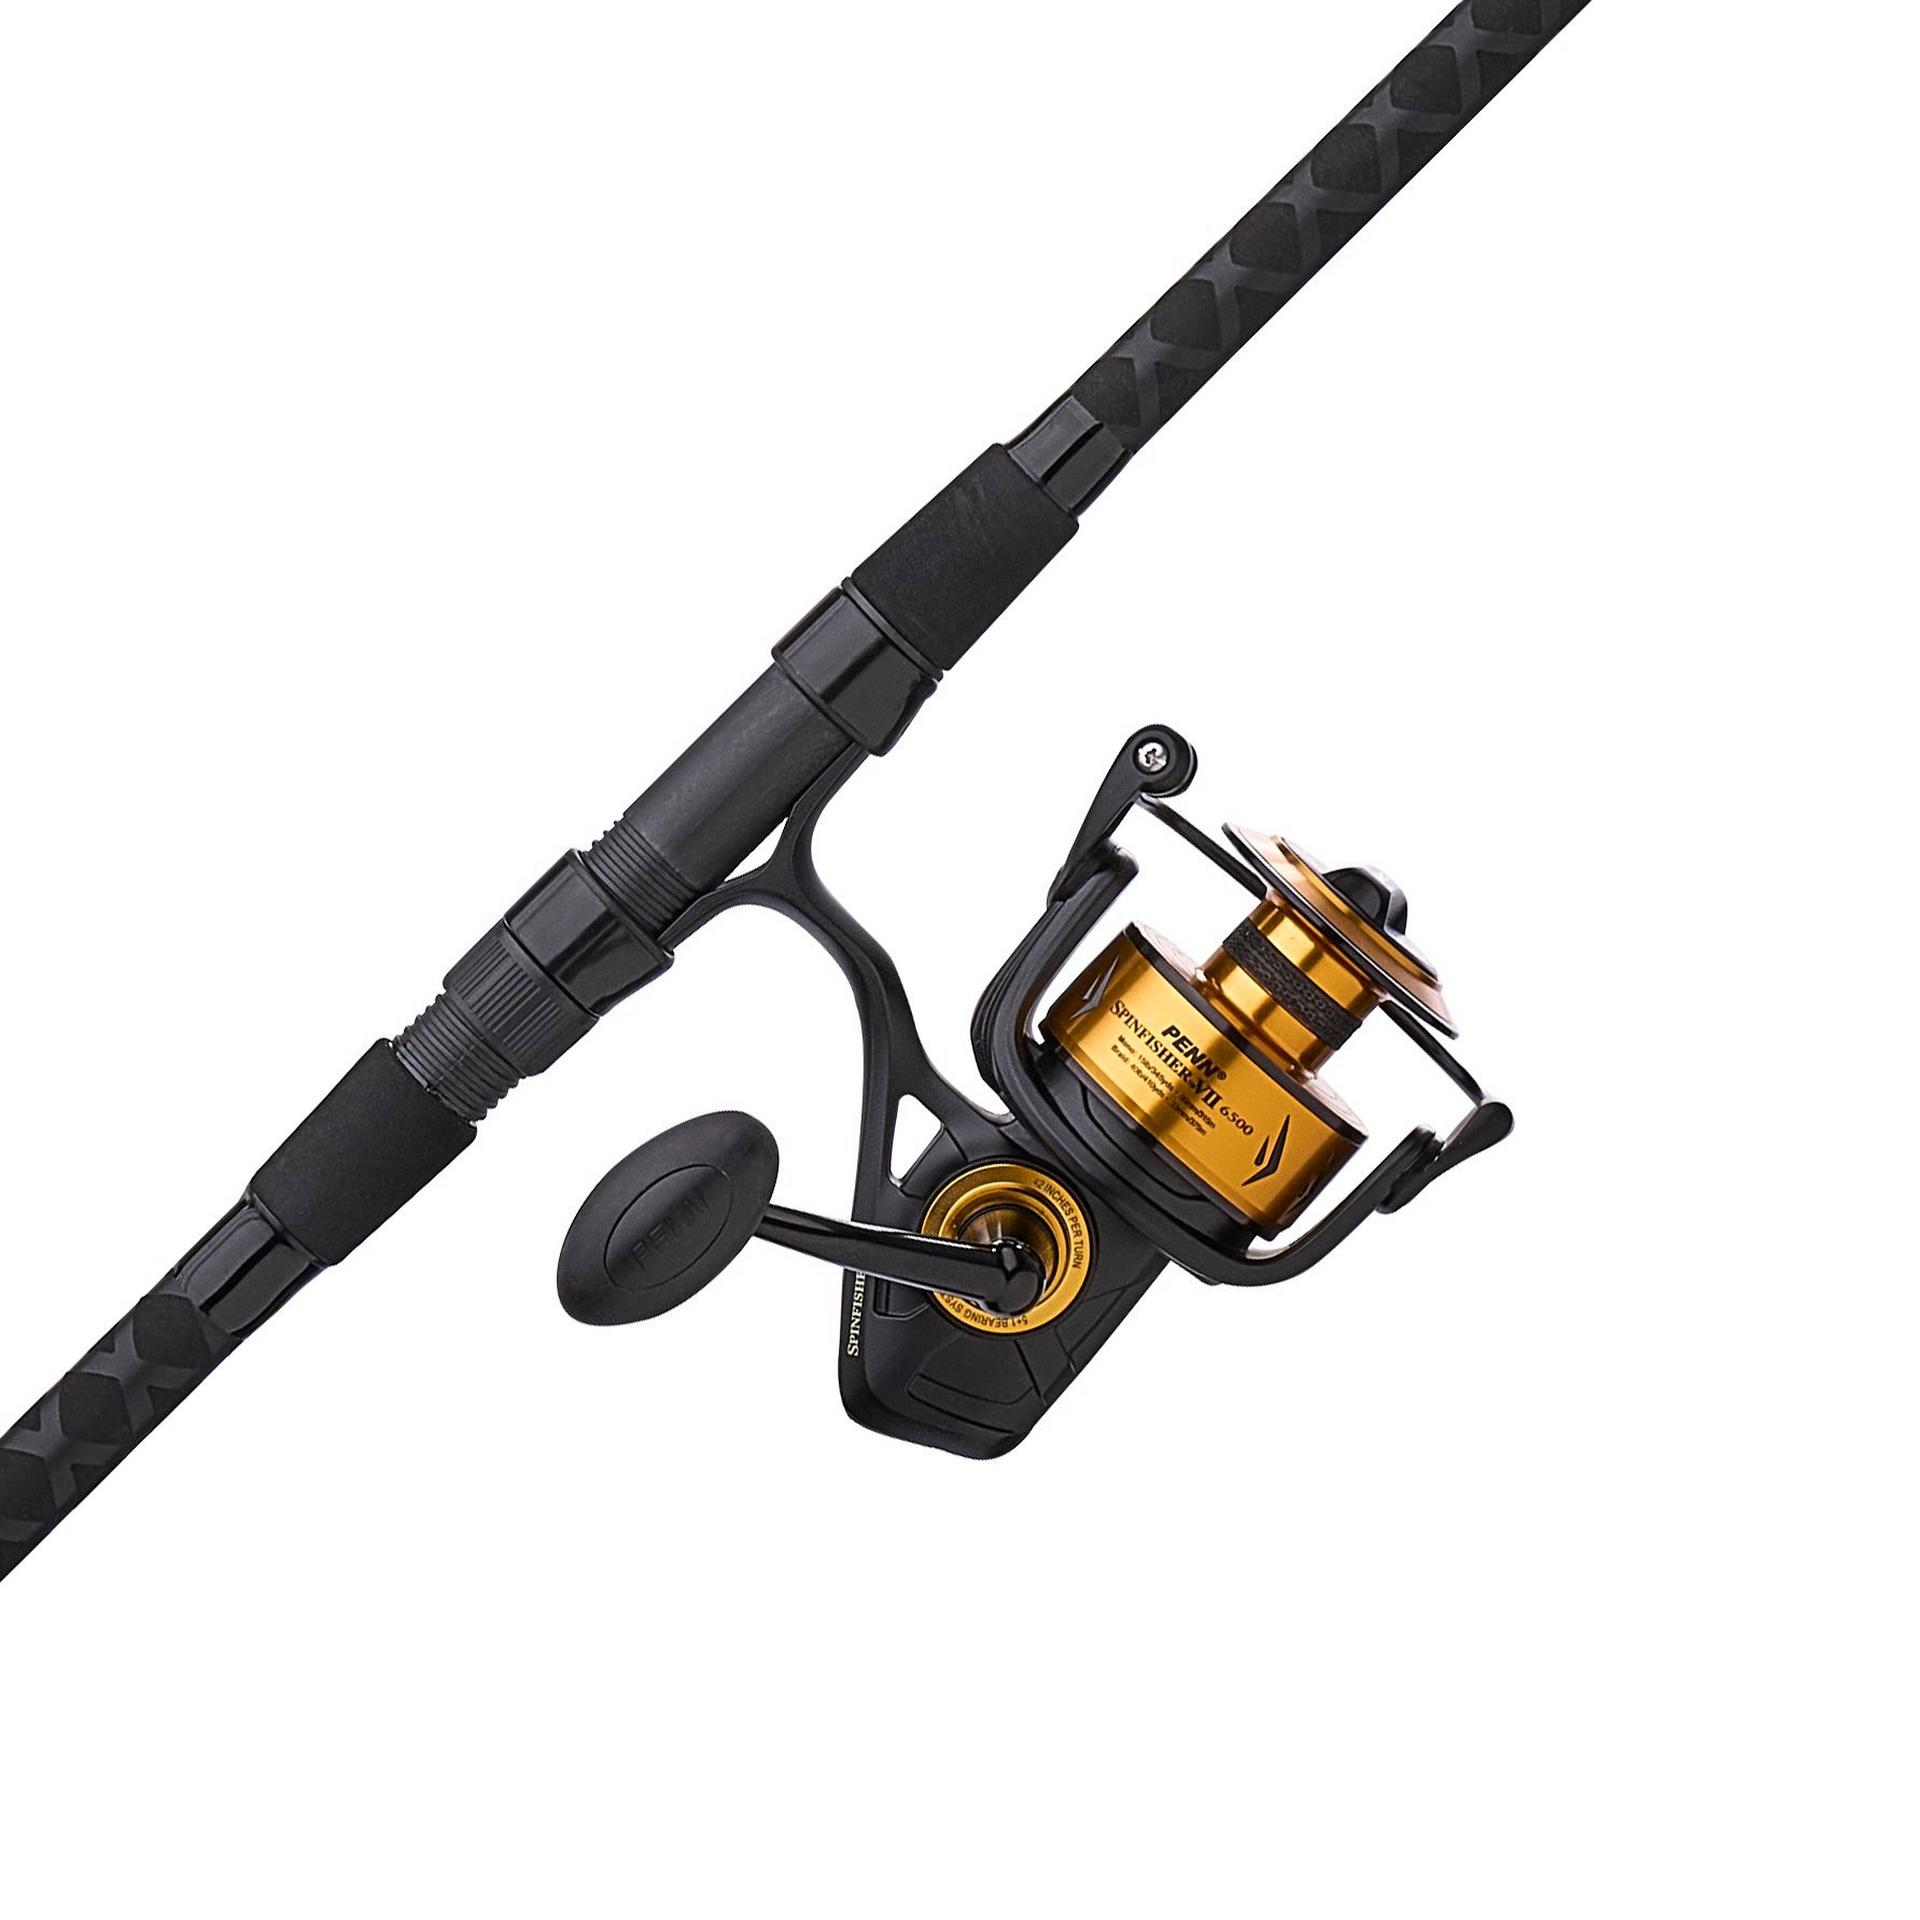 Spinfisher® VII Spinning Rod & Reel Combo